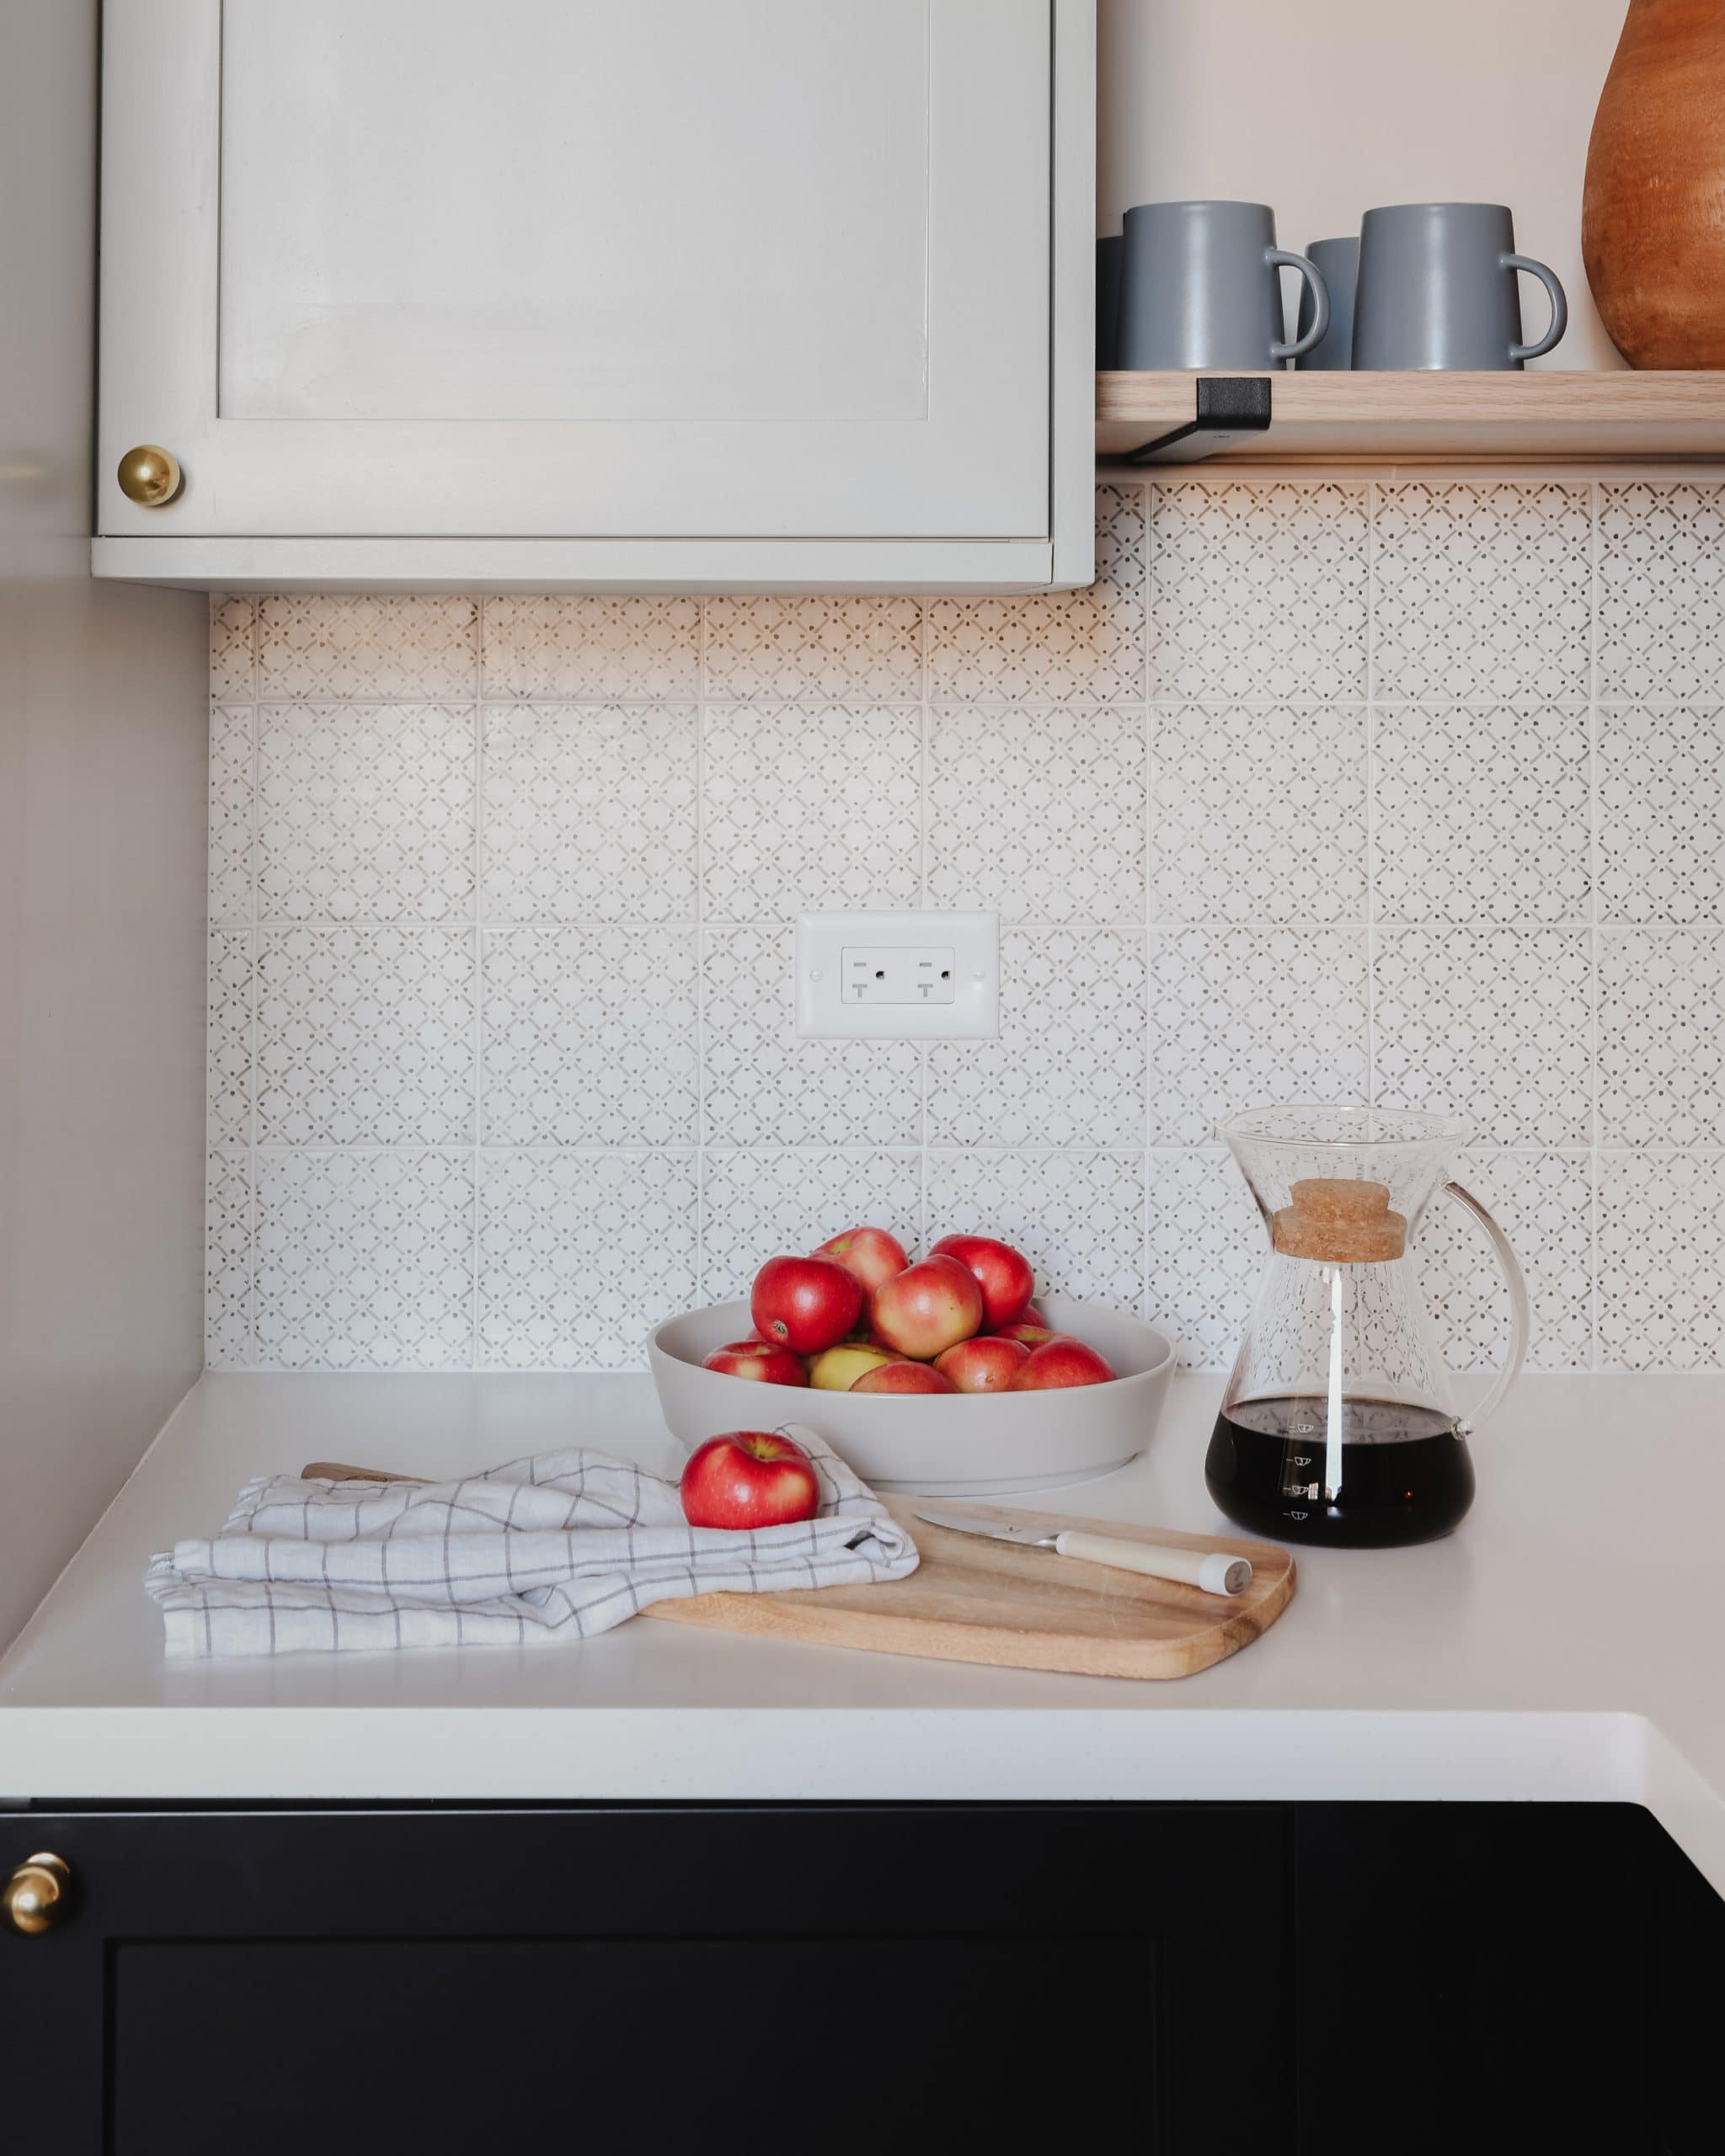 Black kitchen cabinets, white countertop and patterned tile backsplash, styled with apples and coffee | via Yellow Brick Home